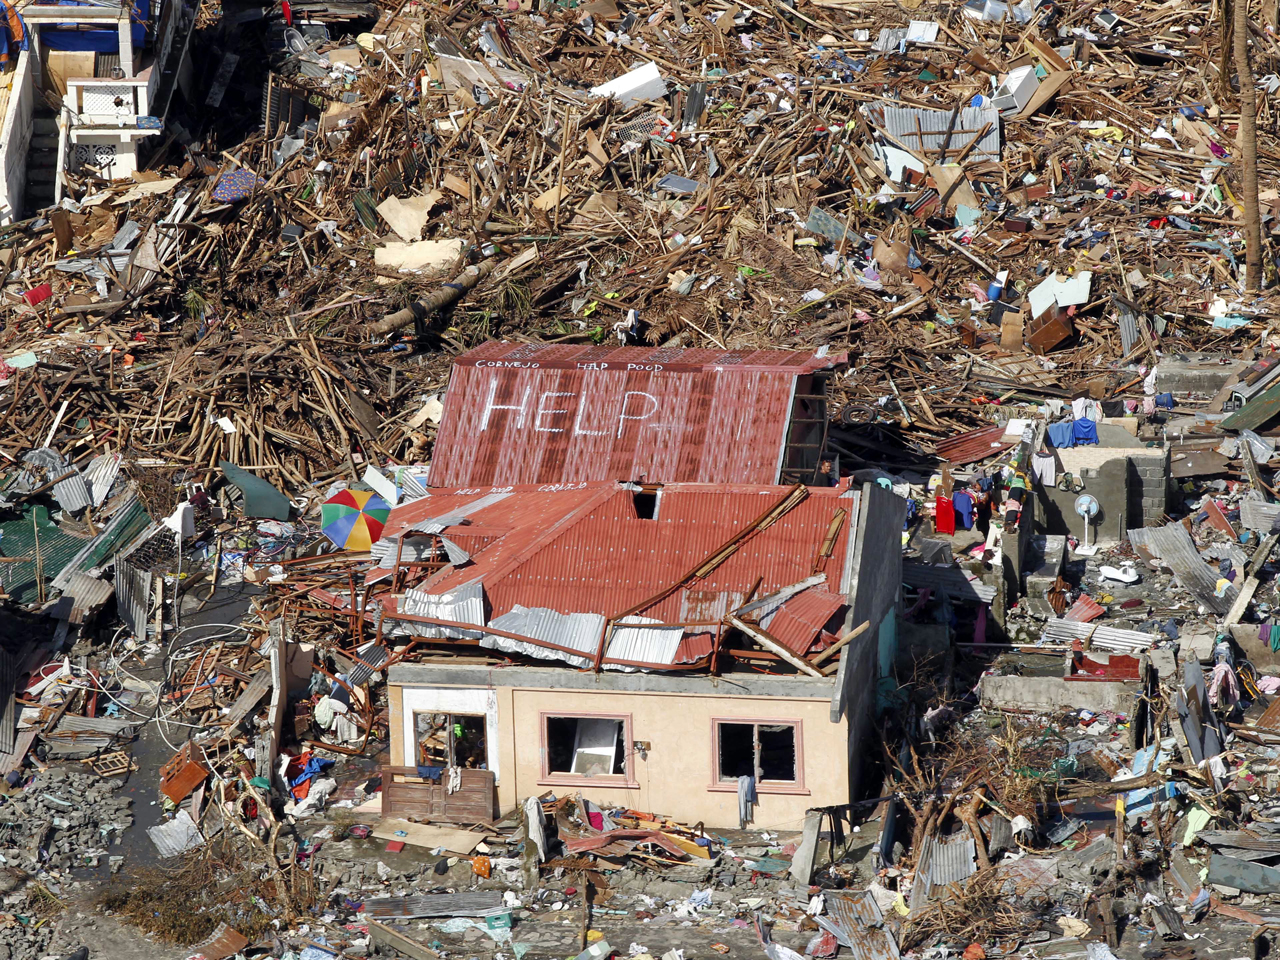 Philippines typhoon aftermath raises worries of disaster zone